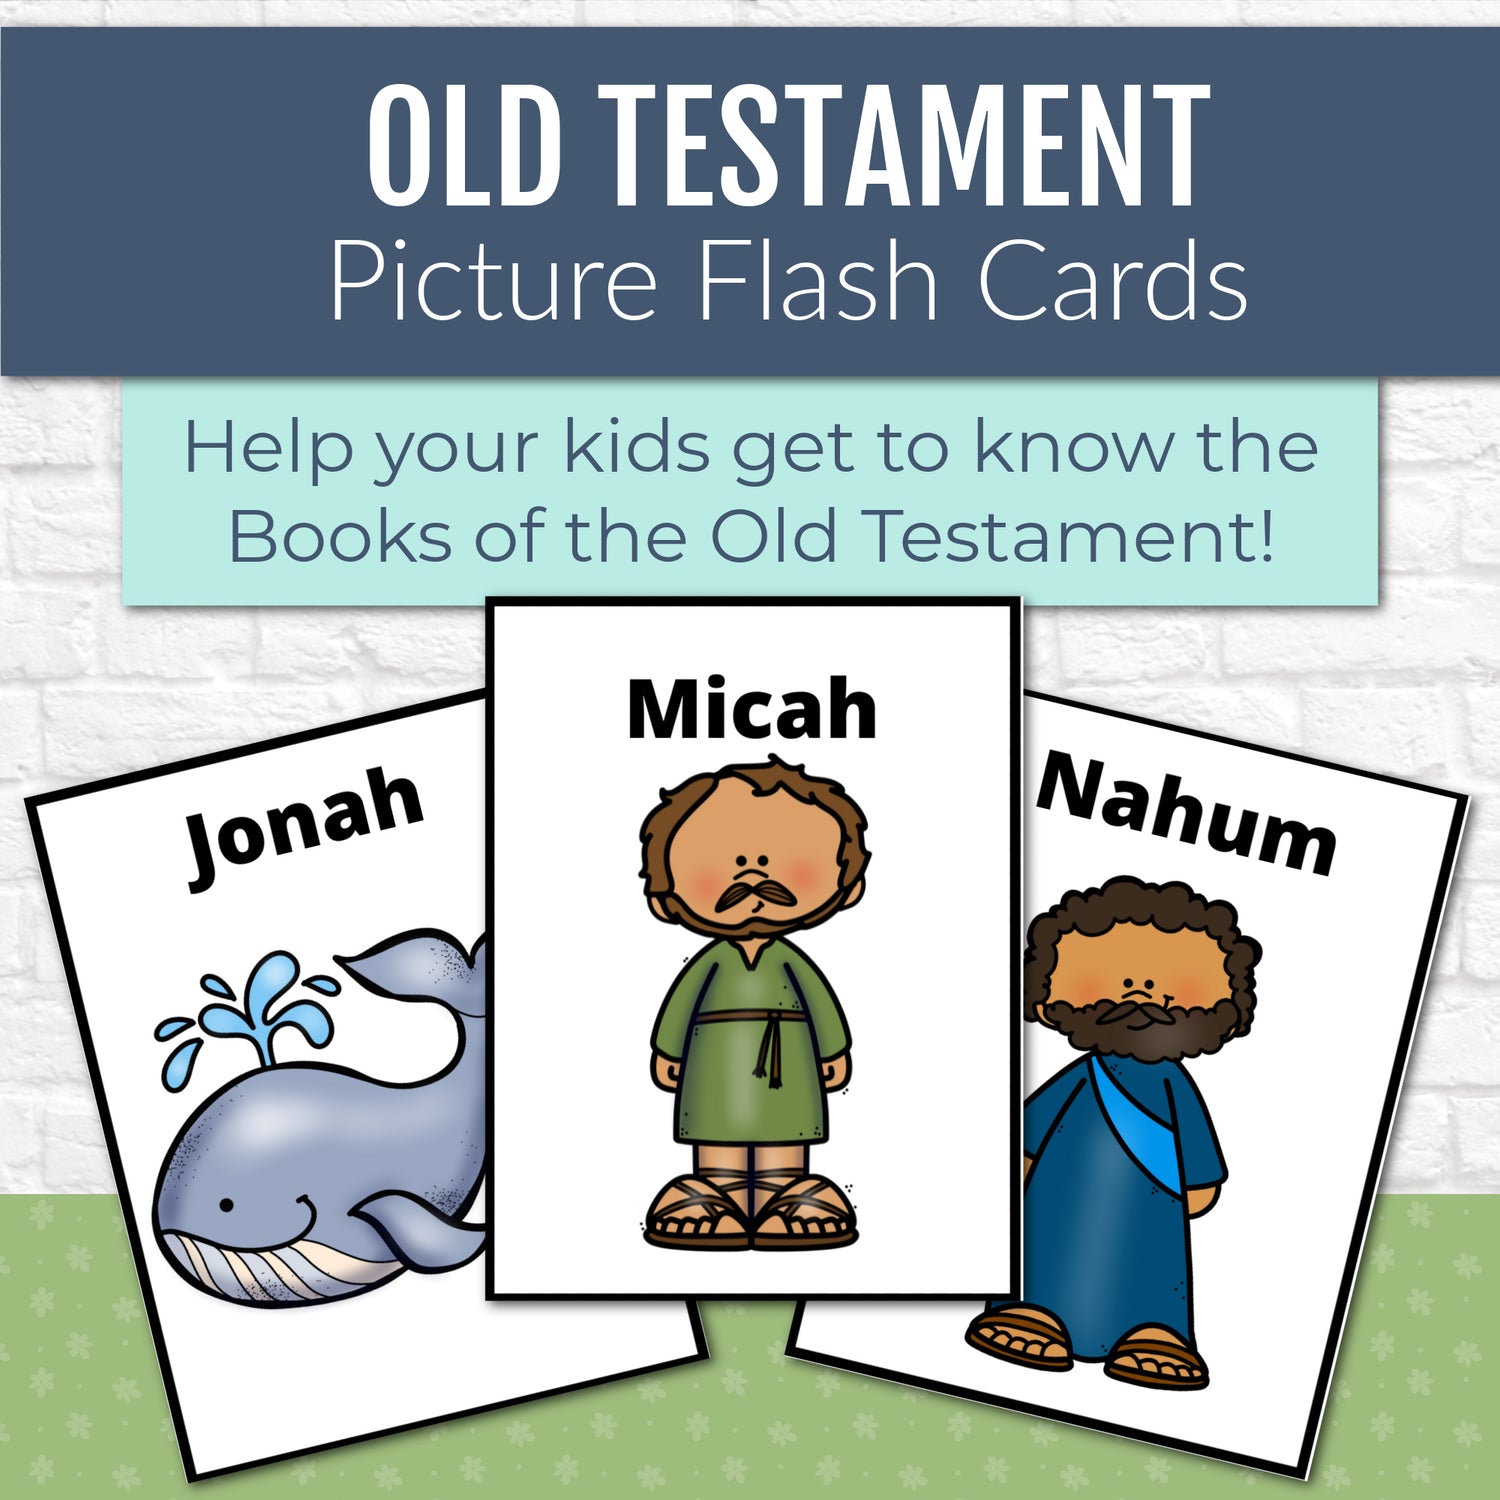 Old Testament Books of the Bible Flash Cards with Pictures